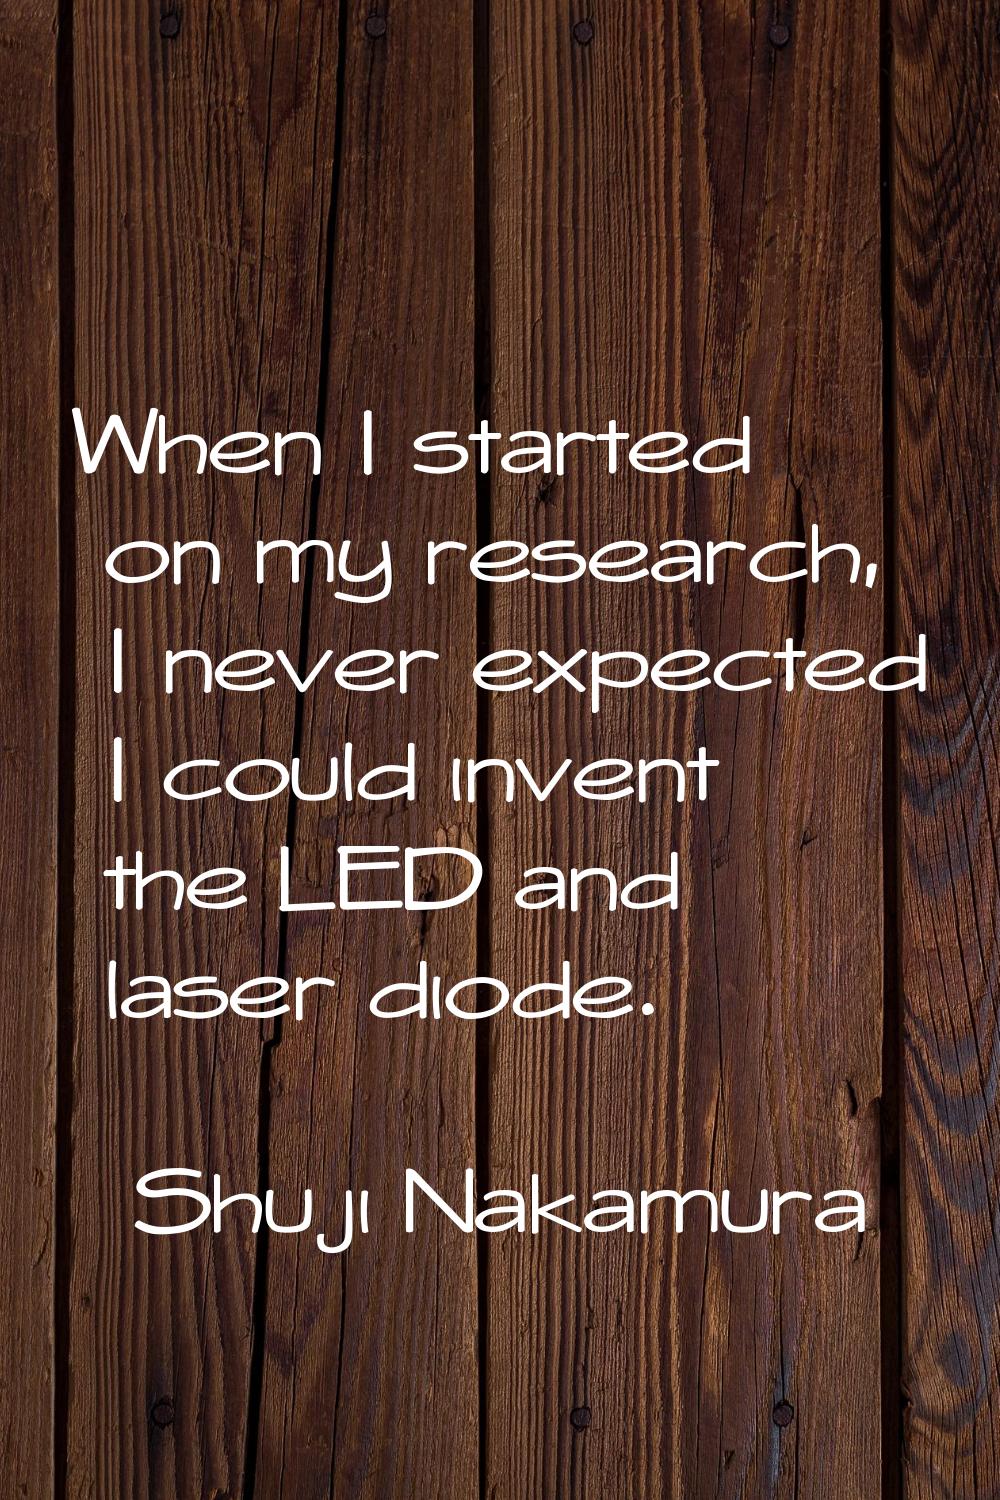 When I started on my research, I never expected I could invent the LED and laser diode.